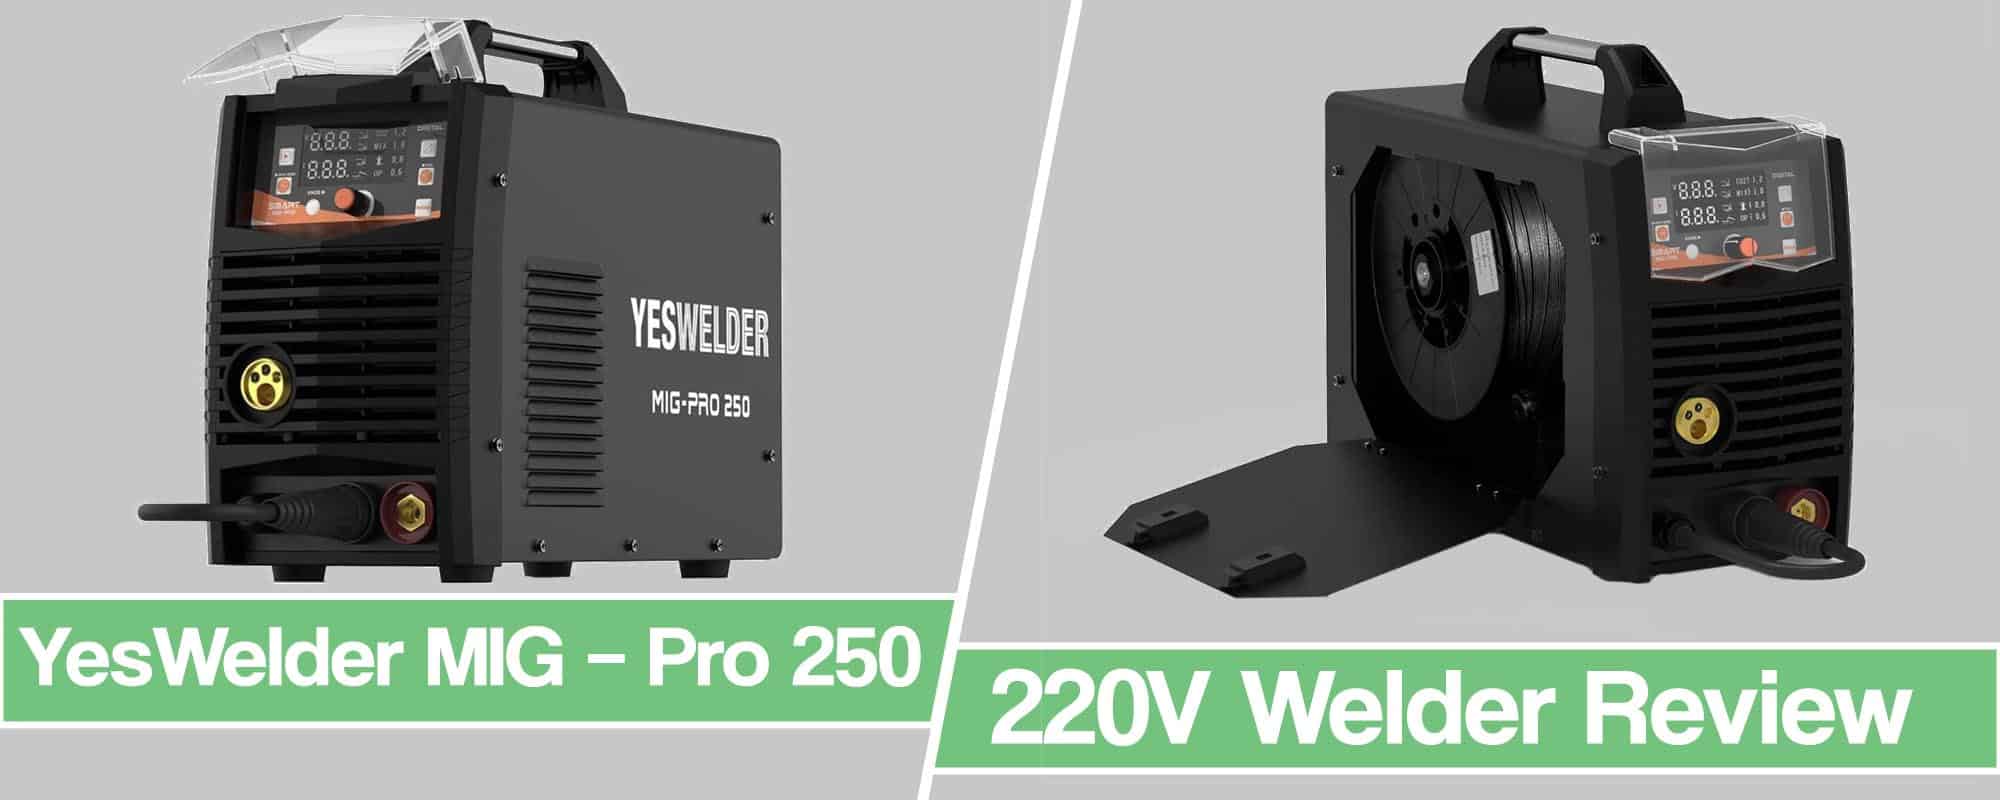 YesWelder MIG – Pro 250A Review 220V Welder for MIG, TIG and Stick